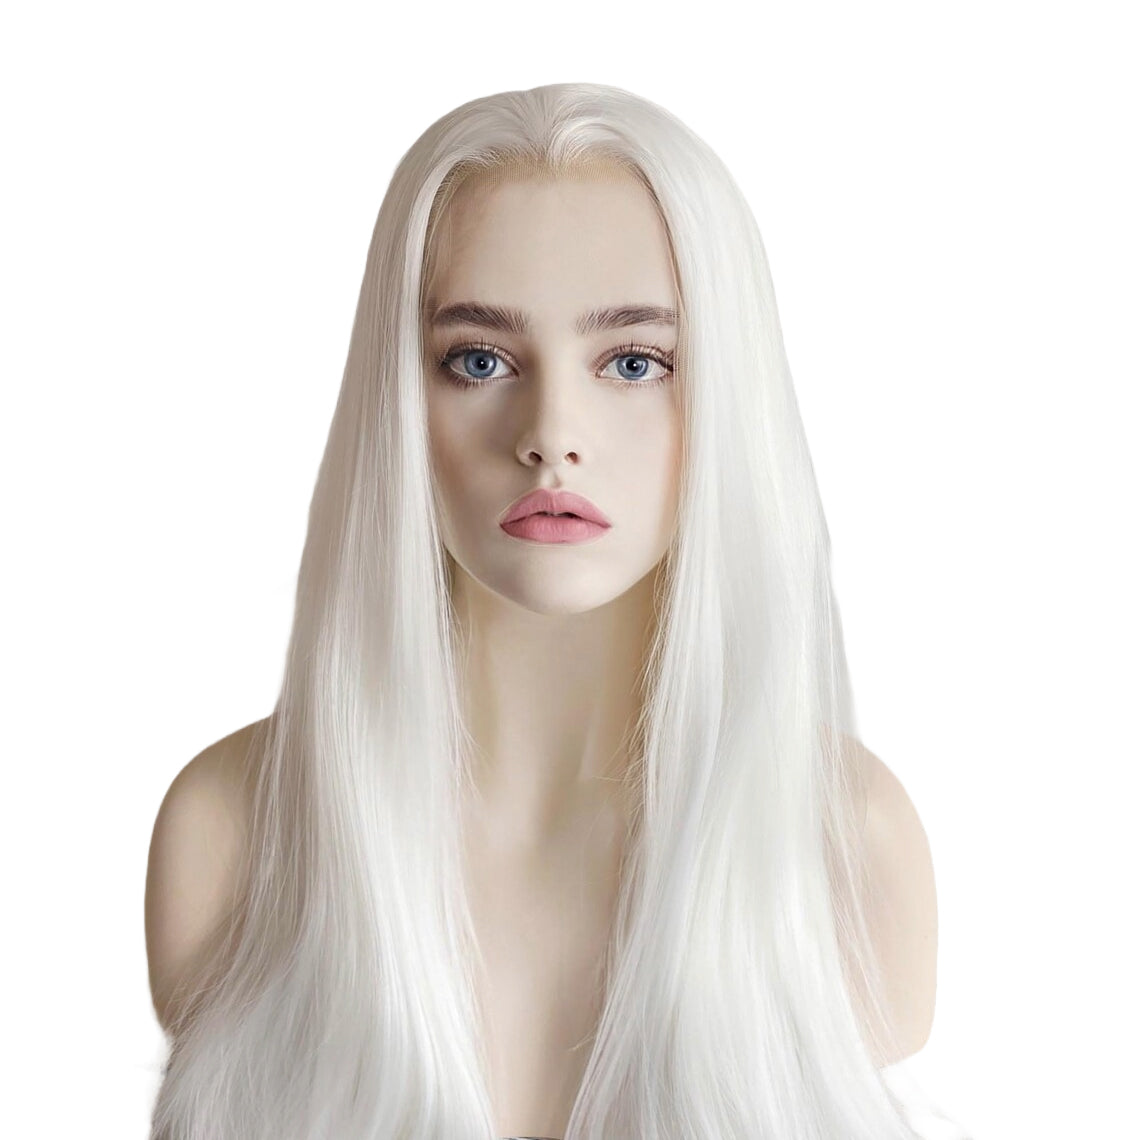 26 Inches Synthetic Hair Mannequin Head, Straight With Slicked